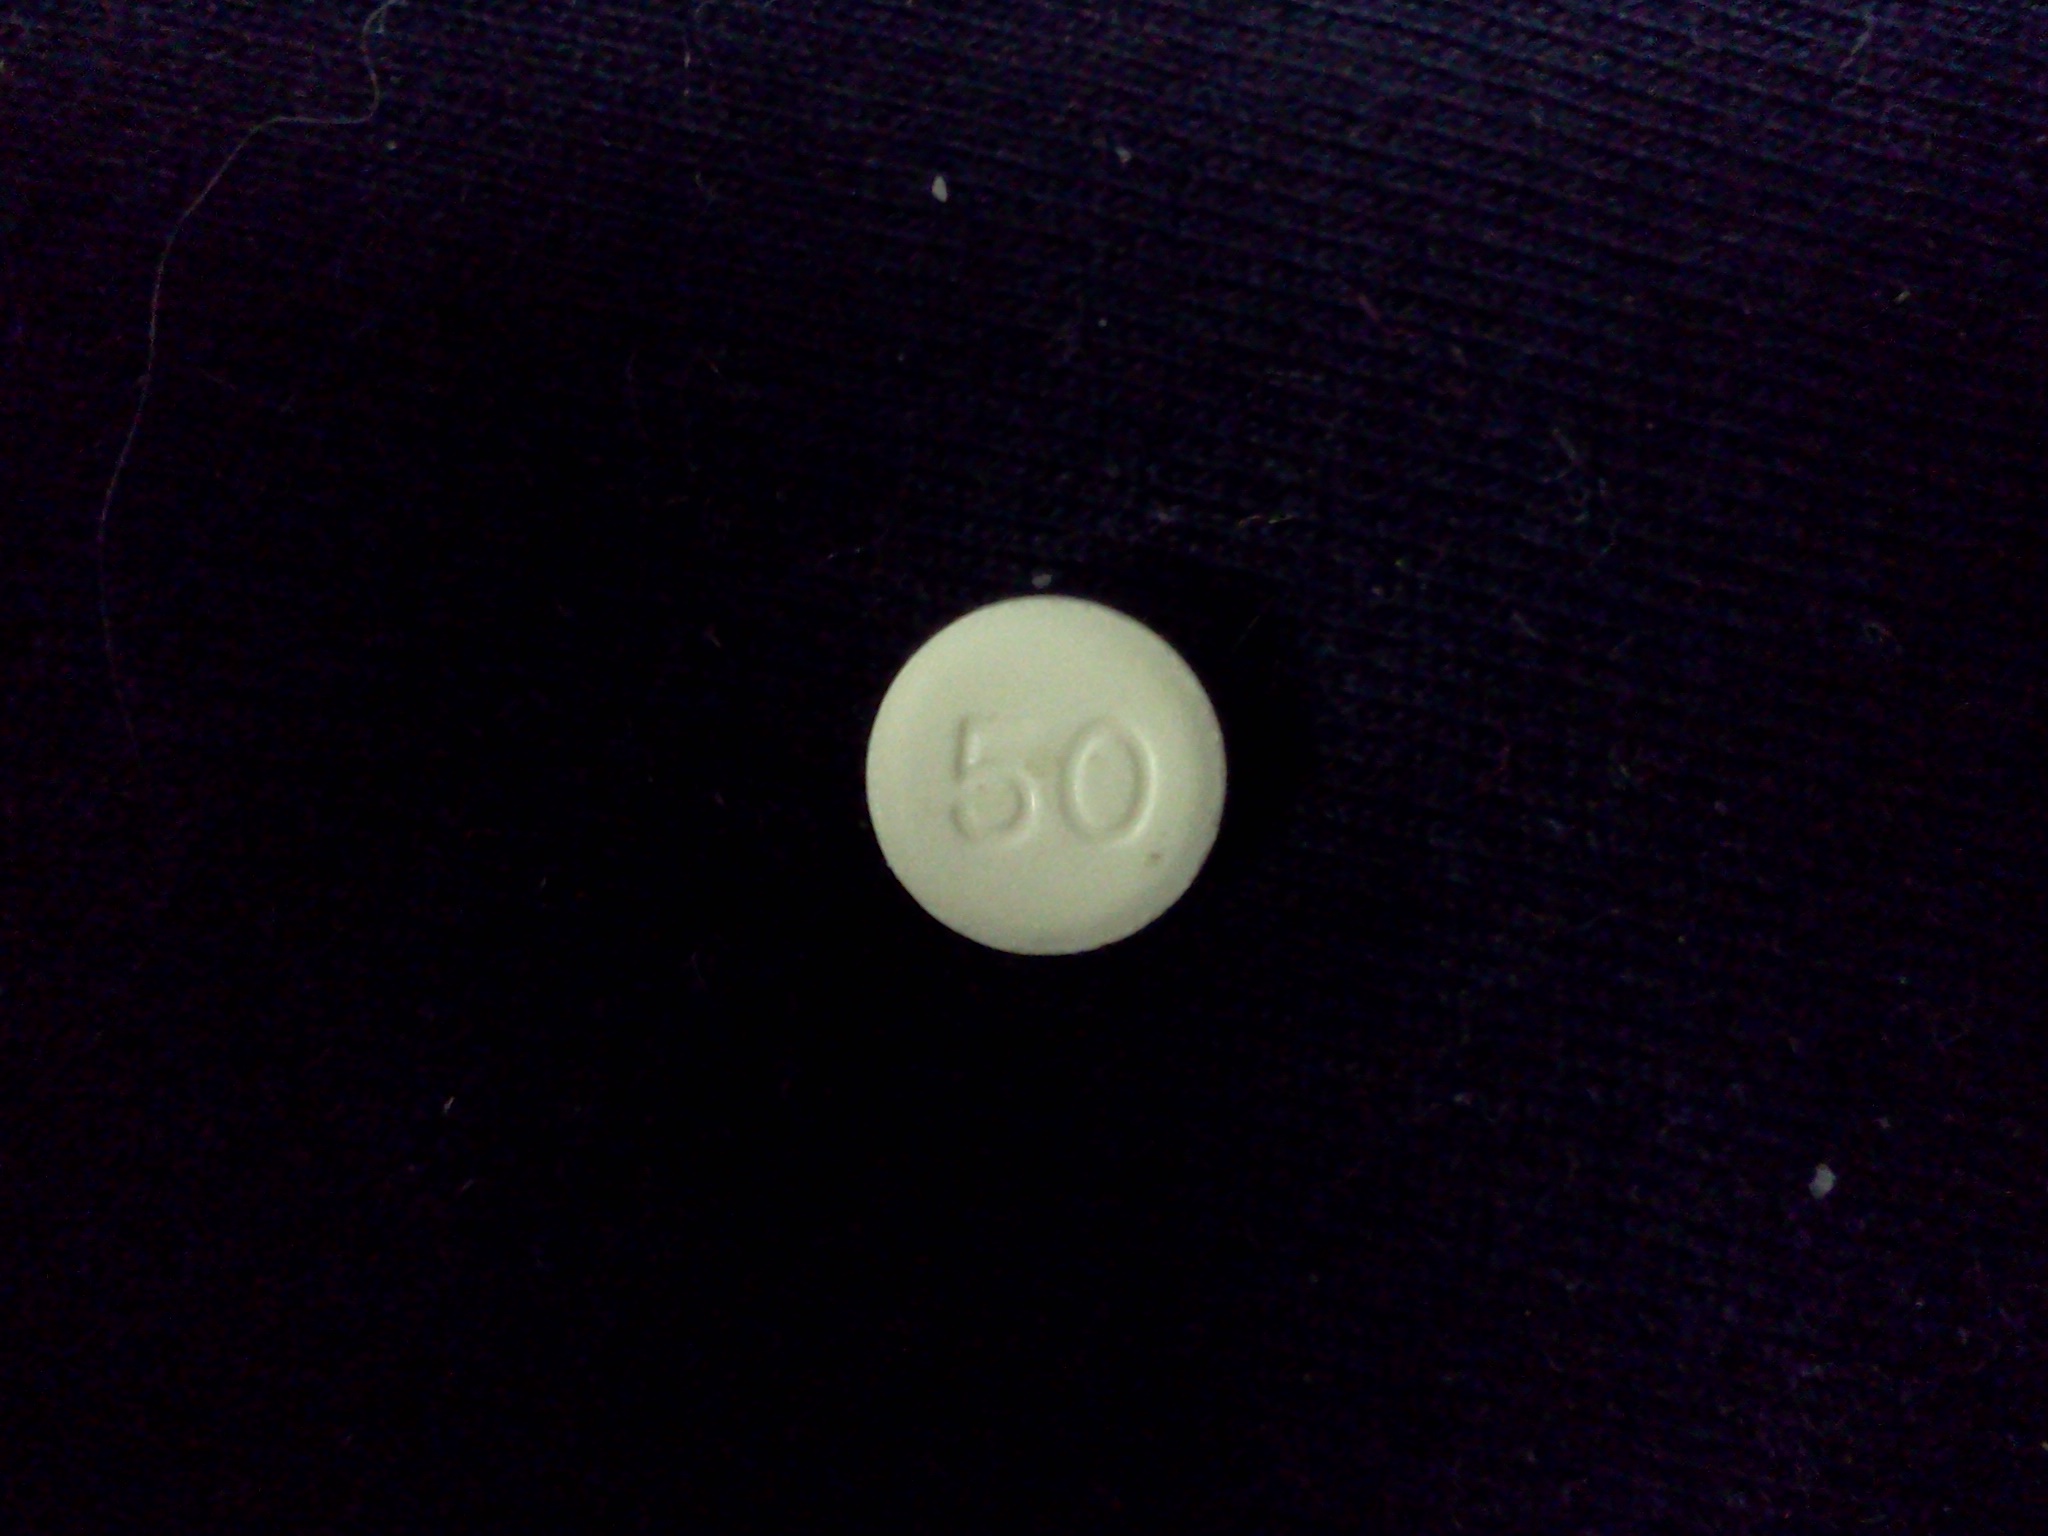 pill marked 2